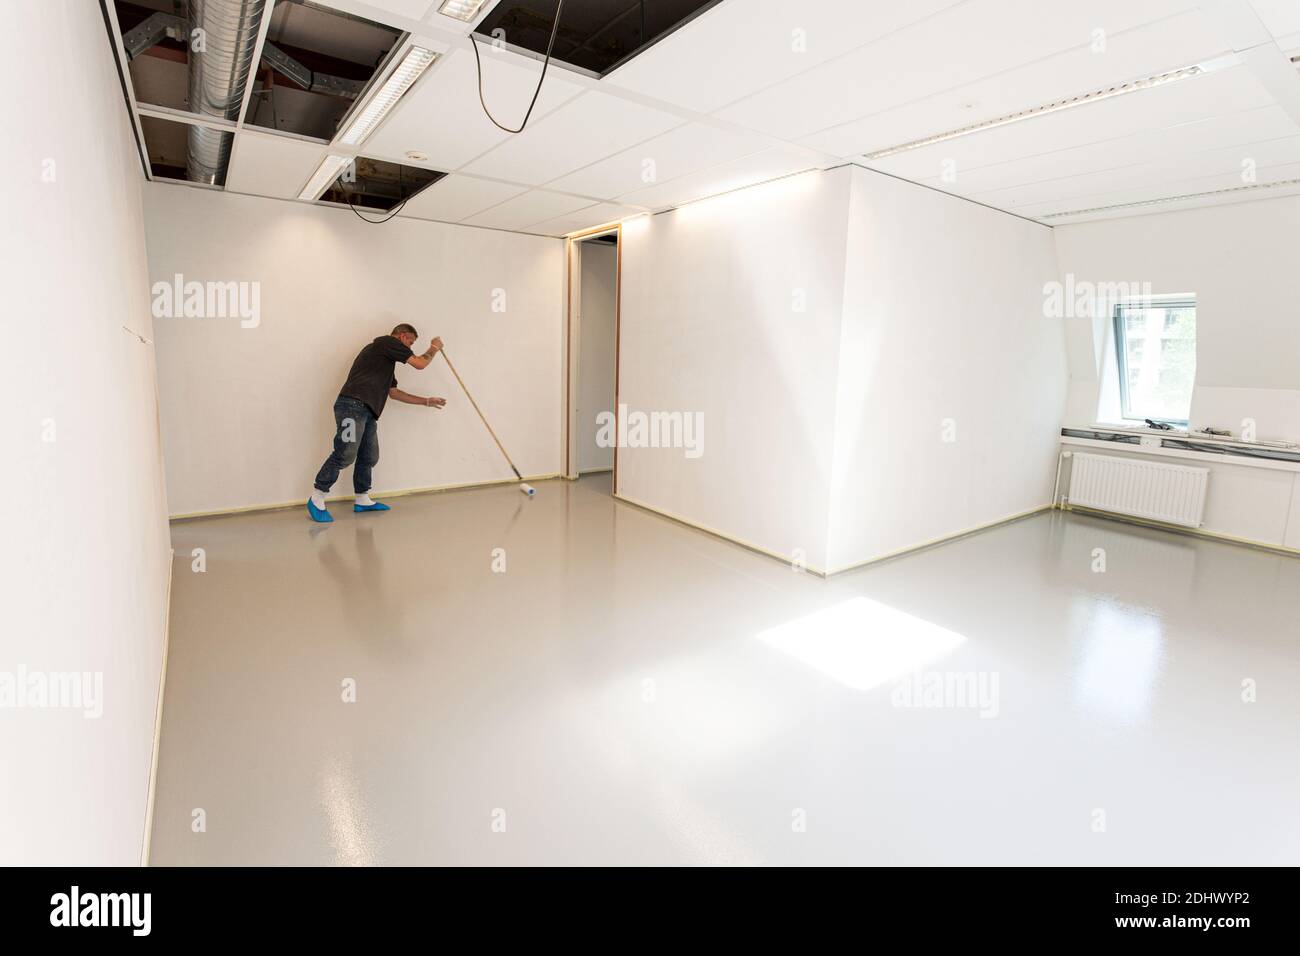 LAREN, THE NETHERLANDS - MAY 16, 2012: Construction workers applying a new layer of an indoor synthetic cast coating floor with a large roller Stock Photo